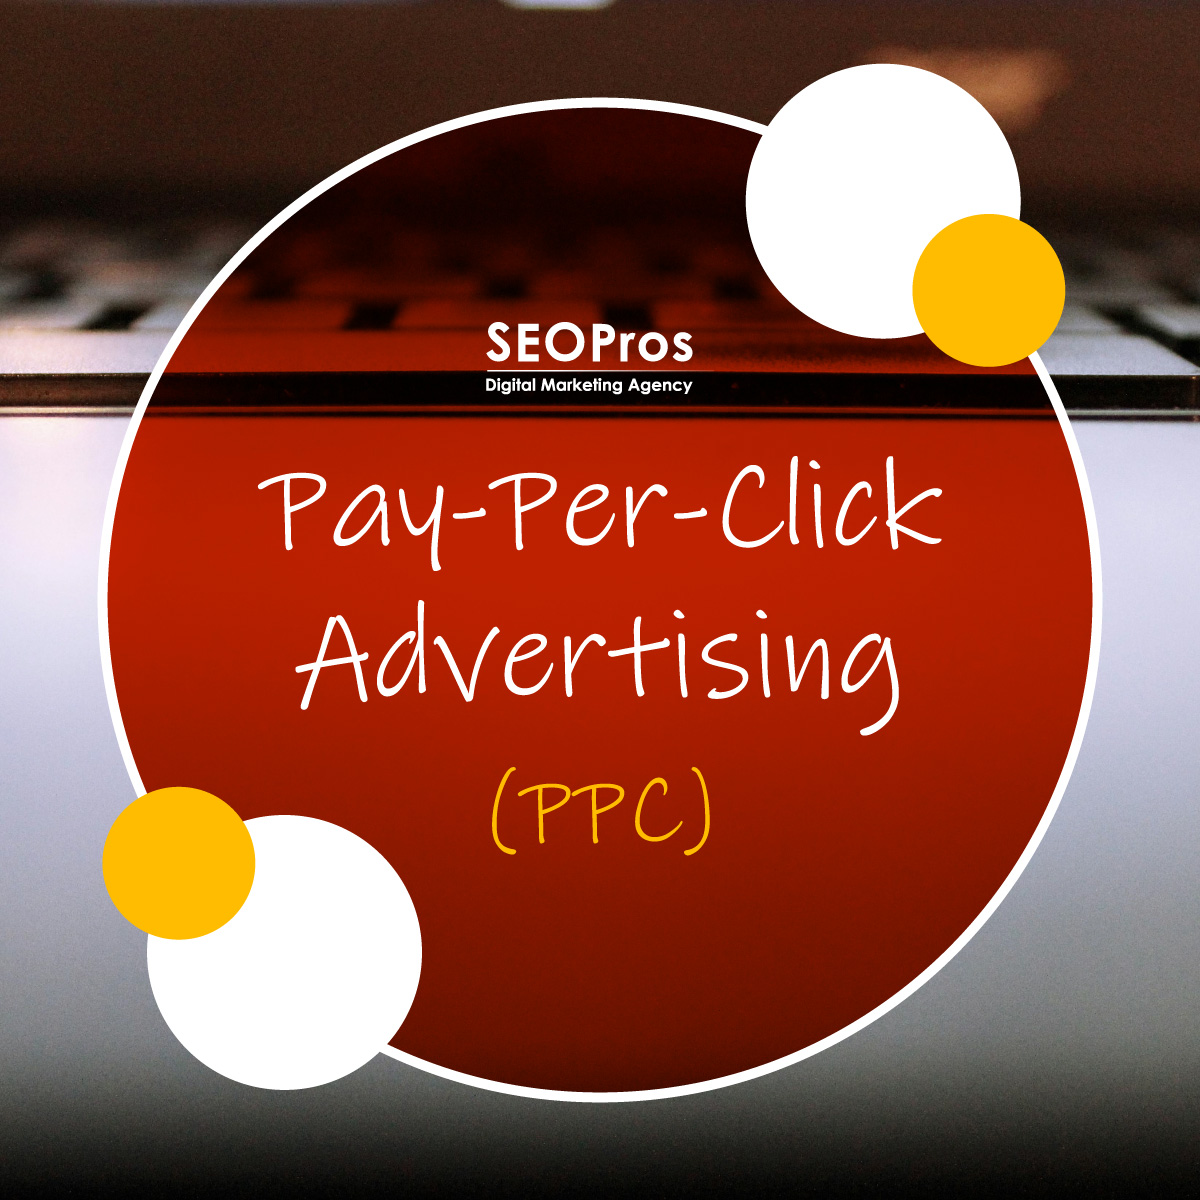 Boost your business's visibility with Pay-Per-Click Advertising!💼

Have a look at seopros.co.za/seo-vs-ppc/ for more information.

#PPCPerfection #ClicksThatCount #AdSavvy #PPCStrategy #ROIBoosters